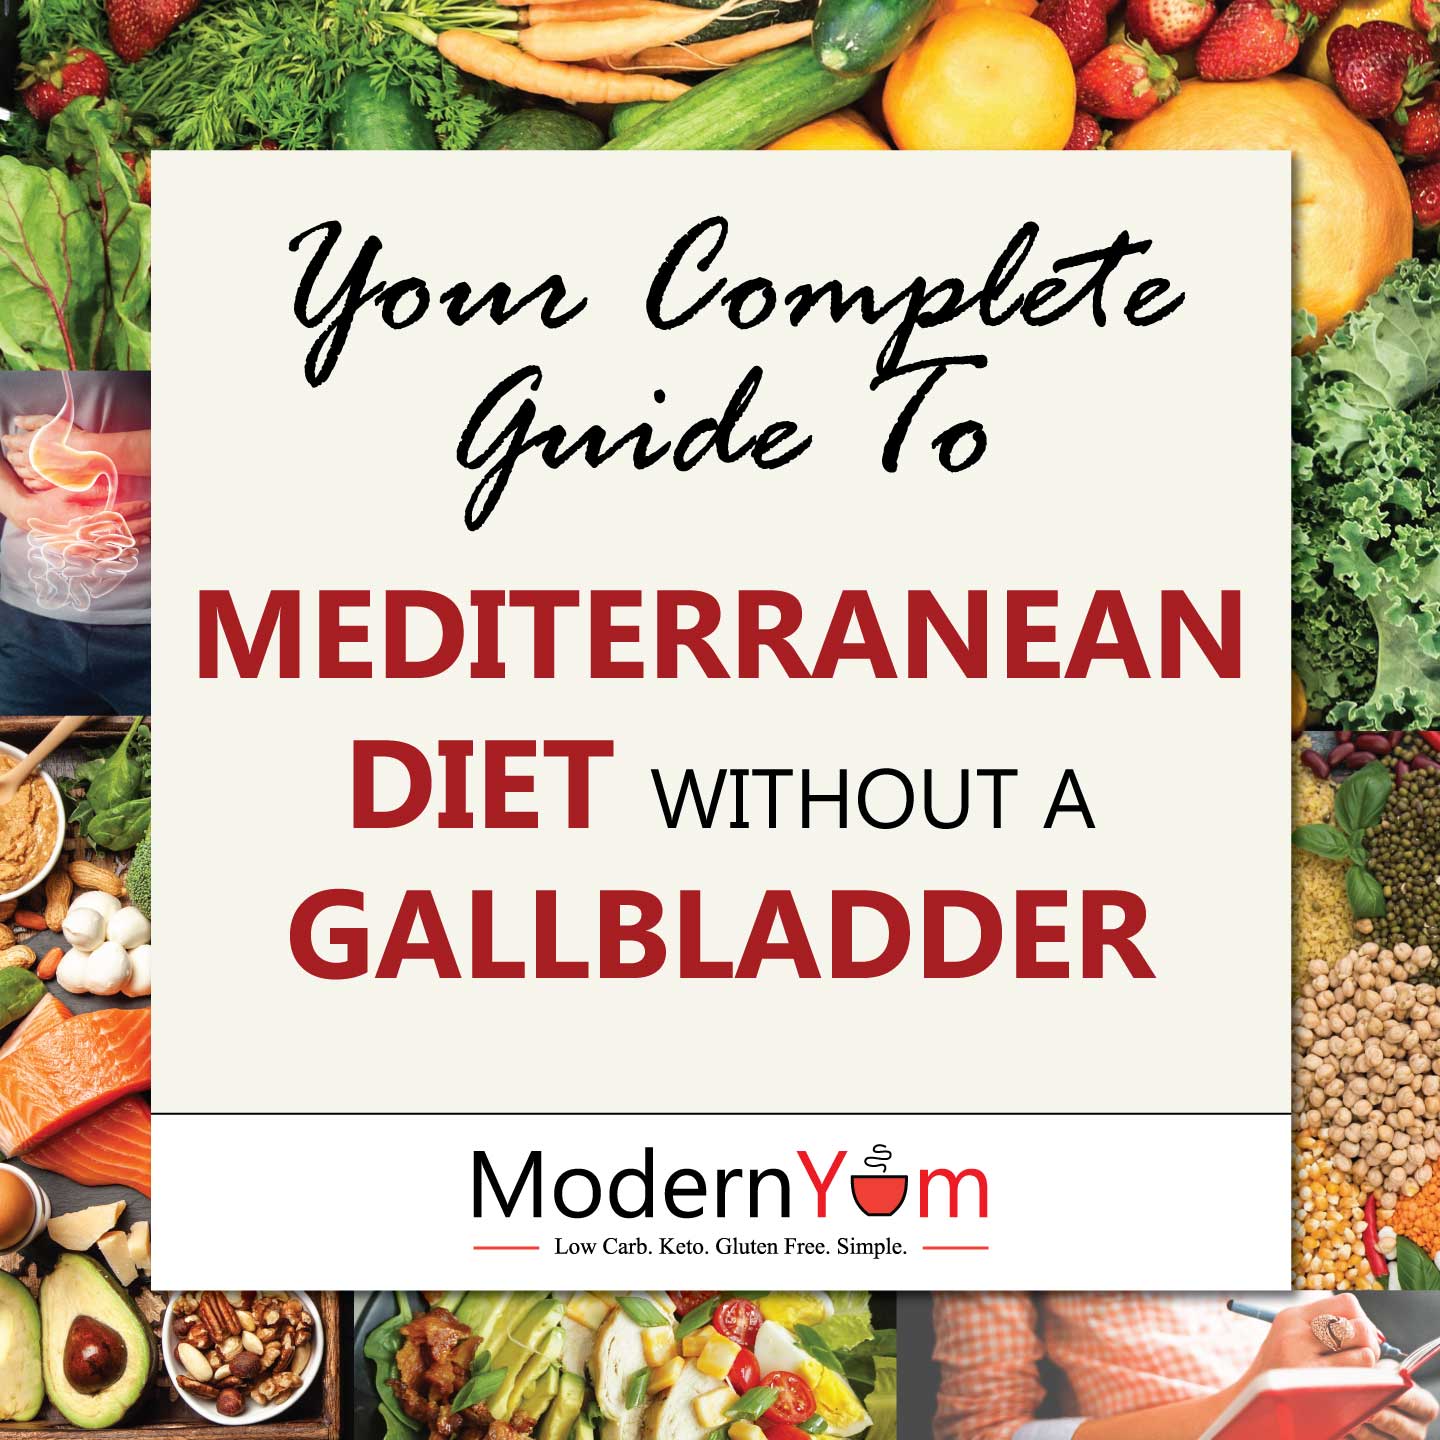 Your Complete Guide To The Mediterranean Diet Without a Gallbladder